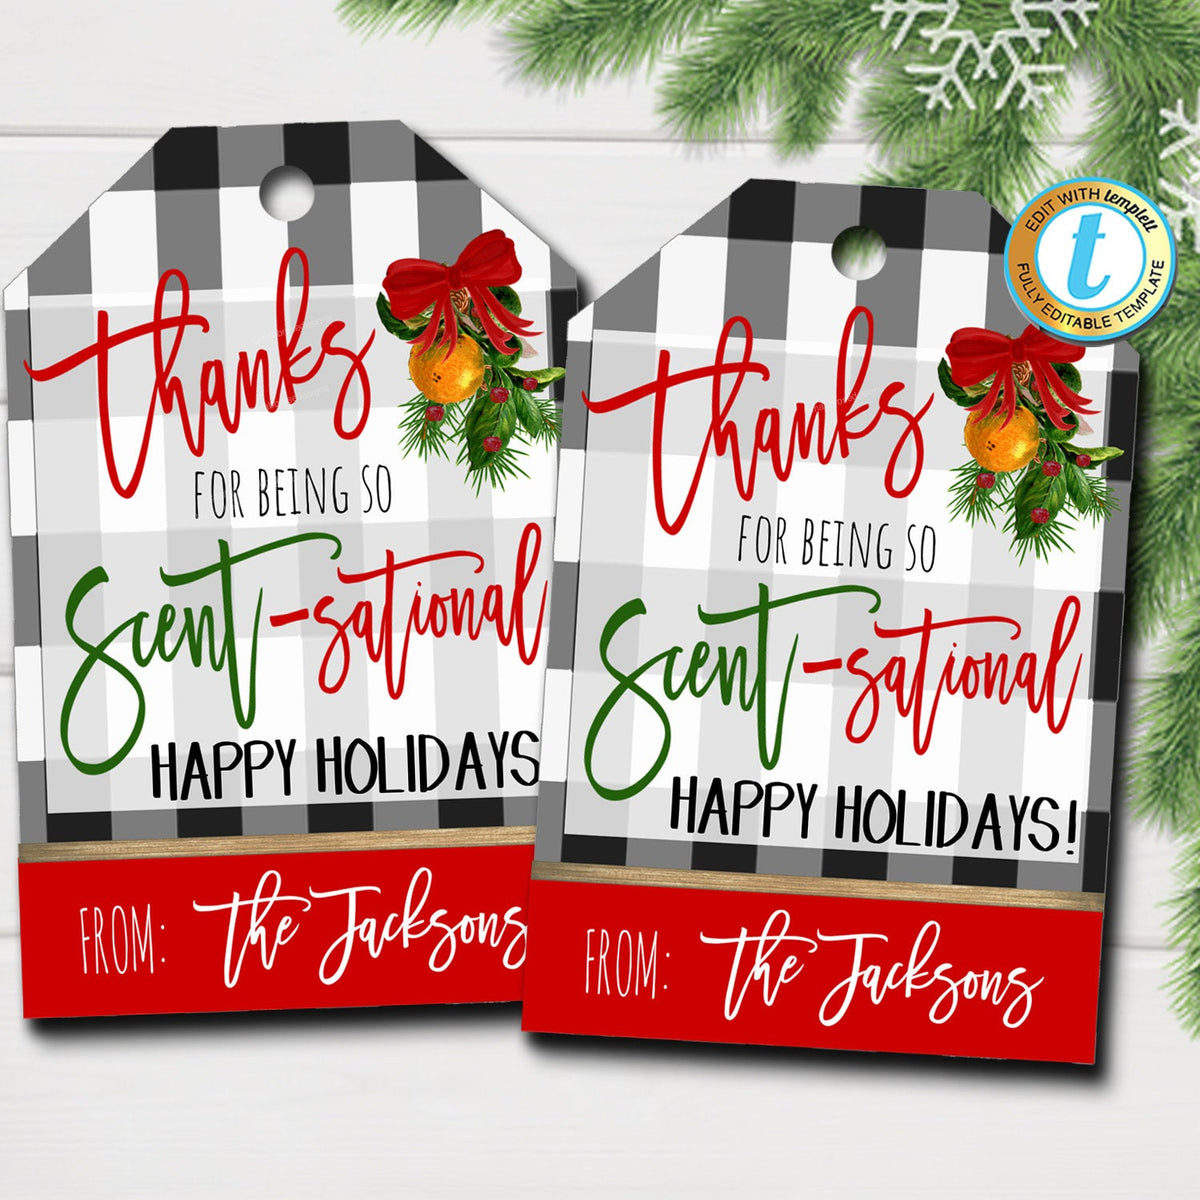 Thanks for Being so Scent-sational Christmas Gift Tag — TidyLady Printables